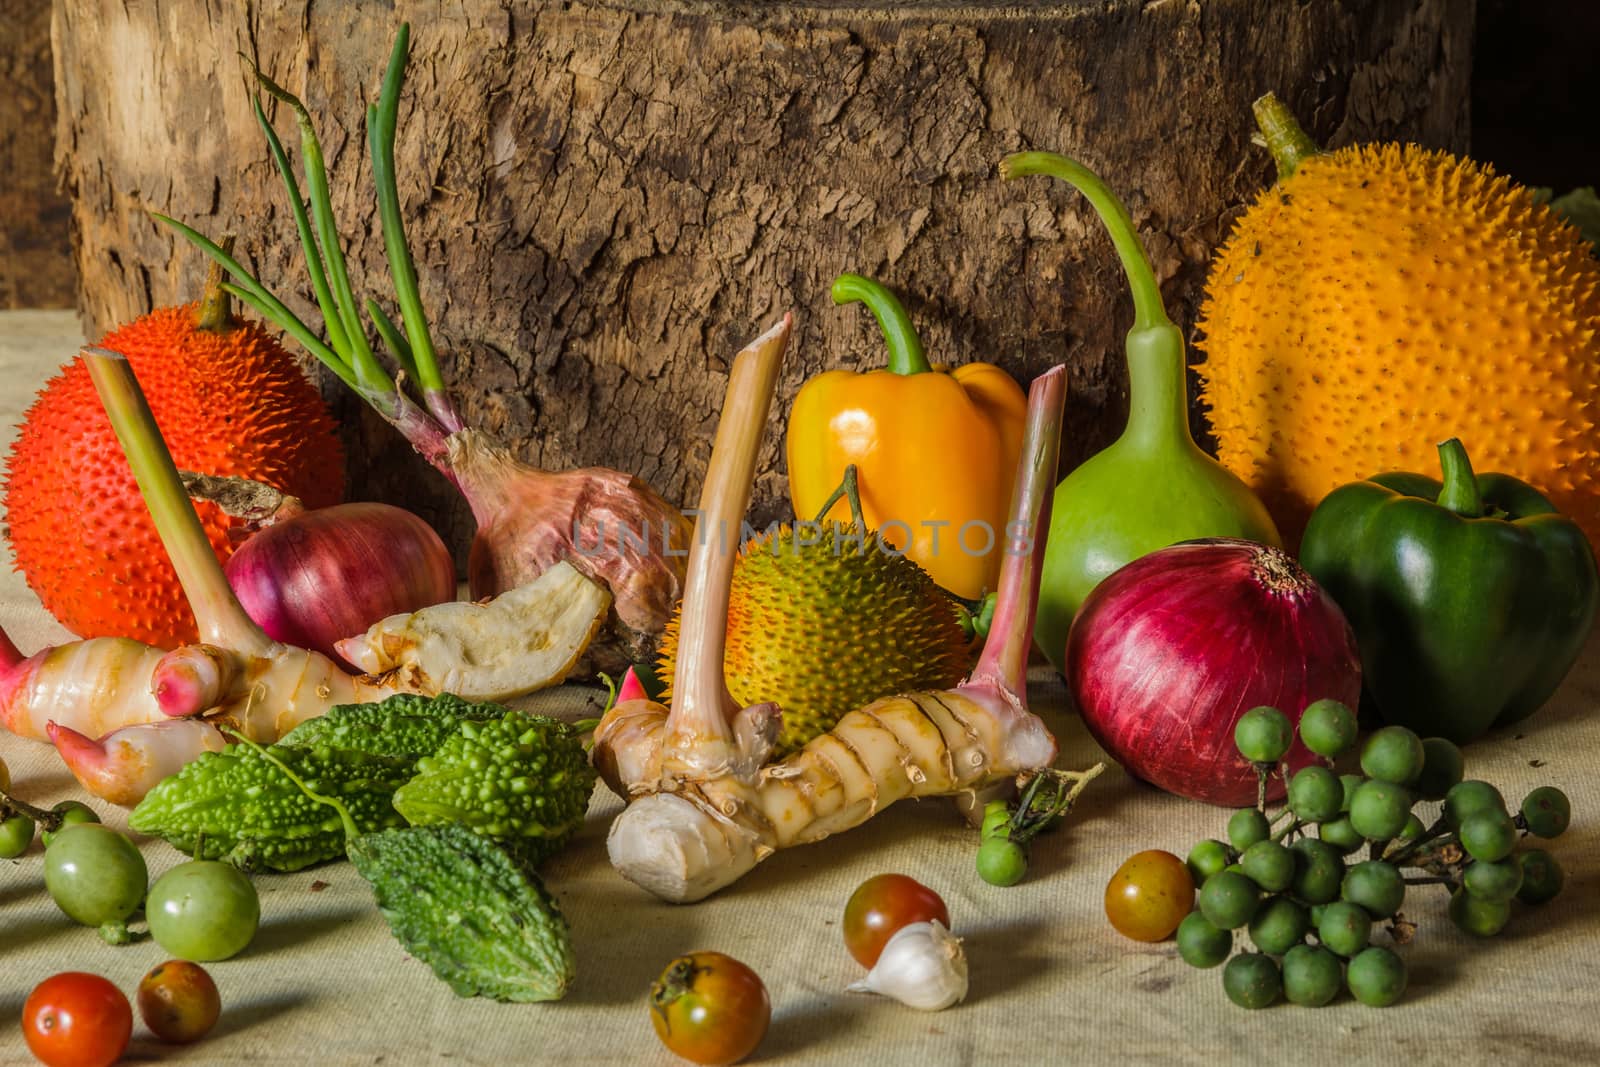 still life Vegetables and fruits. by photosam